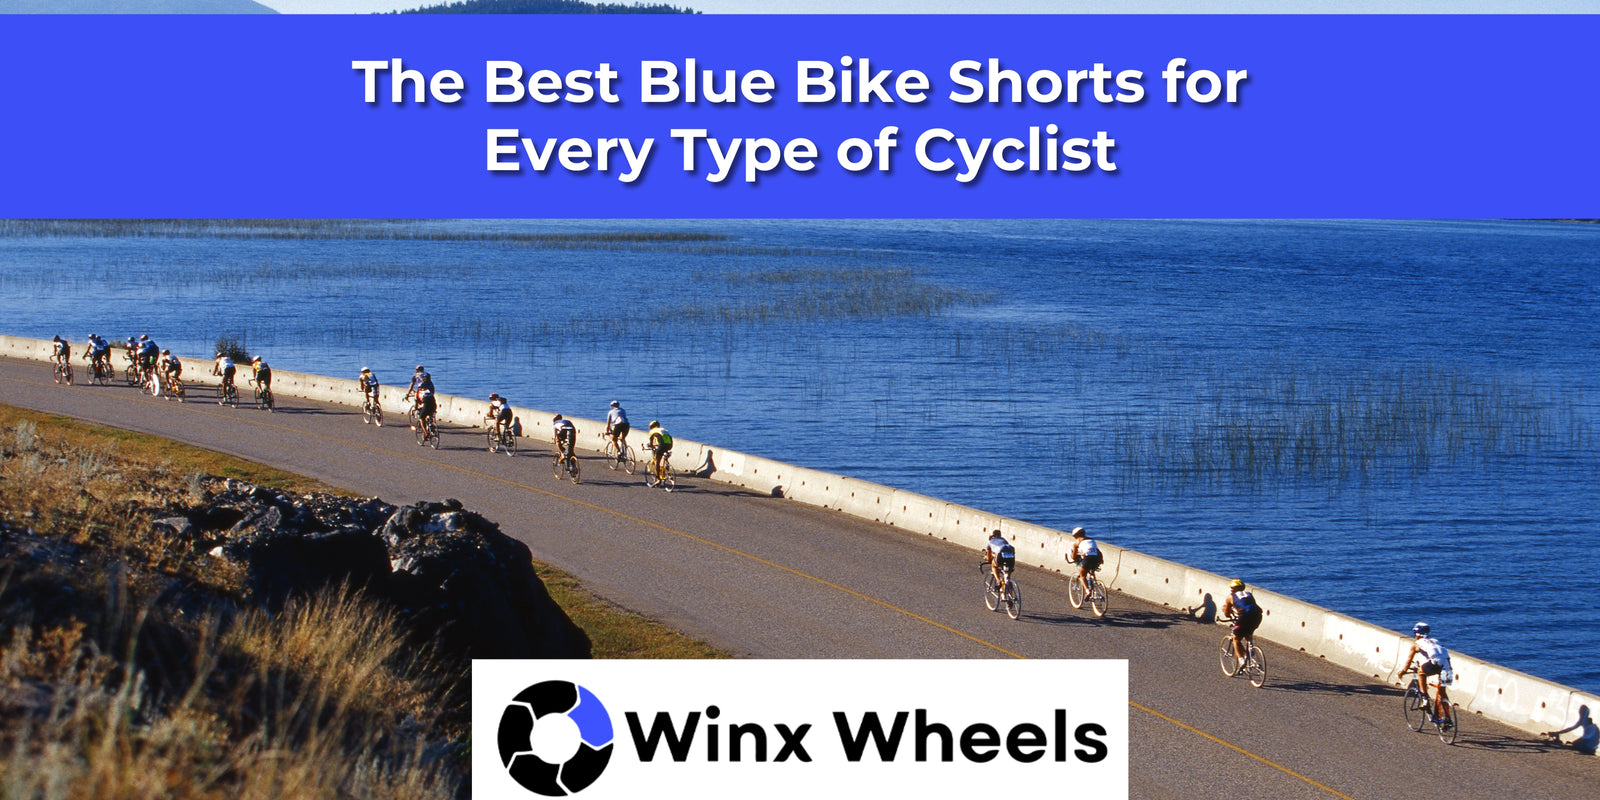 The Best Blue Bike Shorts for Every Type of Cyclist